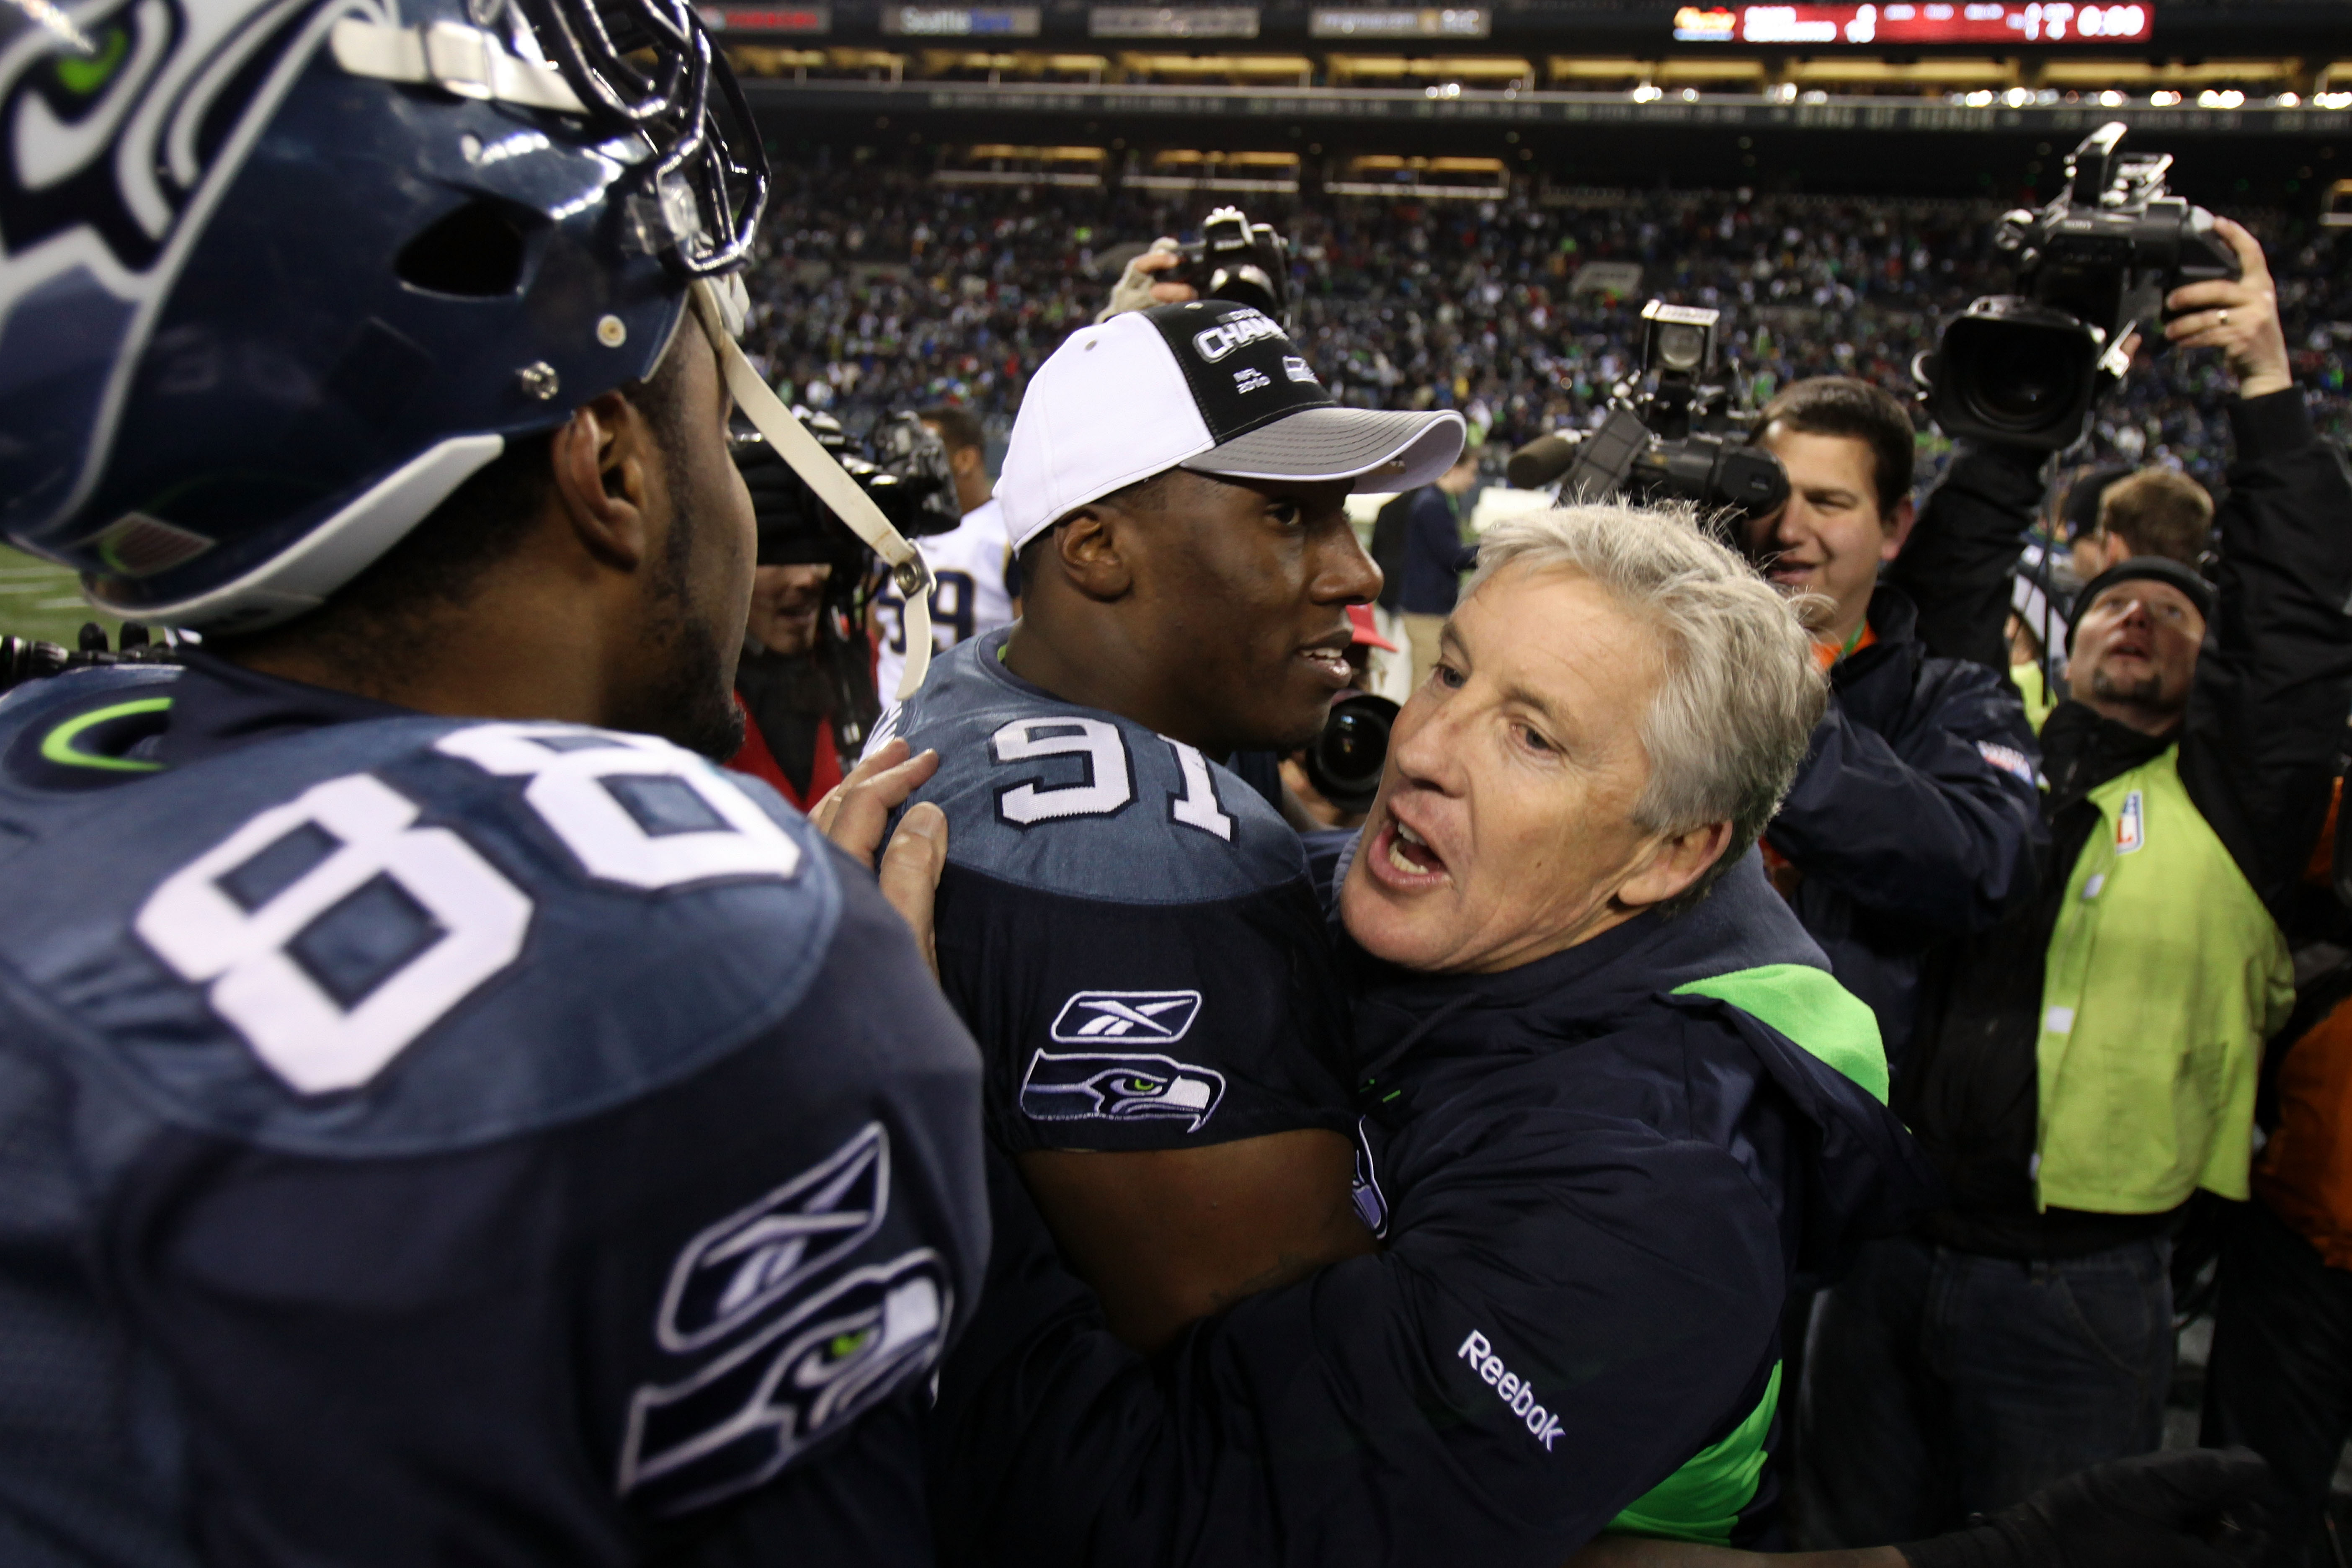 SEATTLE, WA - JANUARY 02:  Head coach Pete Carroll of the Seattle Seahawks hugs defensive end Chris Clemons #91 after defeating the St. Louis Rams 16-6 at Qwest Field on January 2, 2011 in Seattle, Washington.  (Photo by Otto Greule Jr/Getty Images)